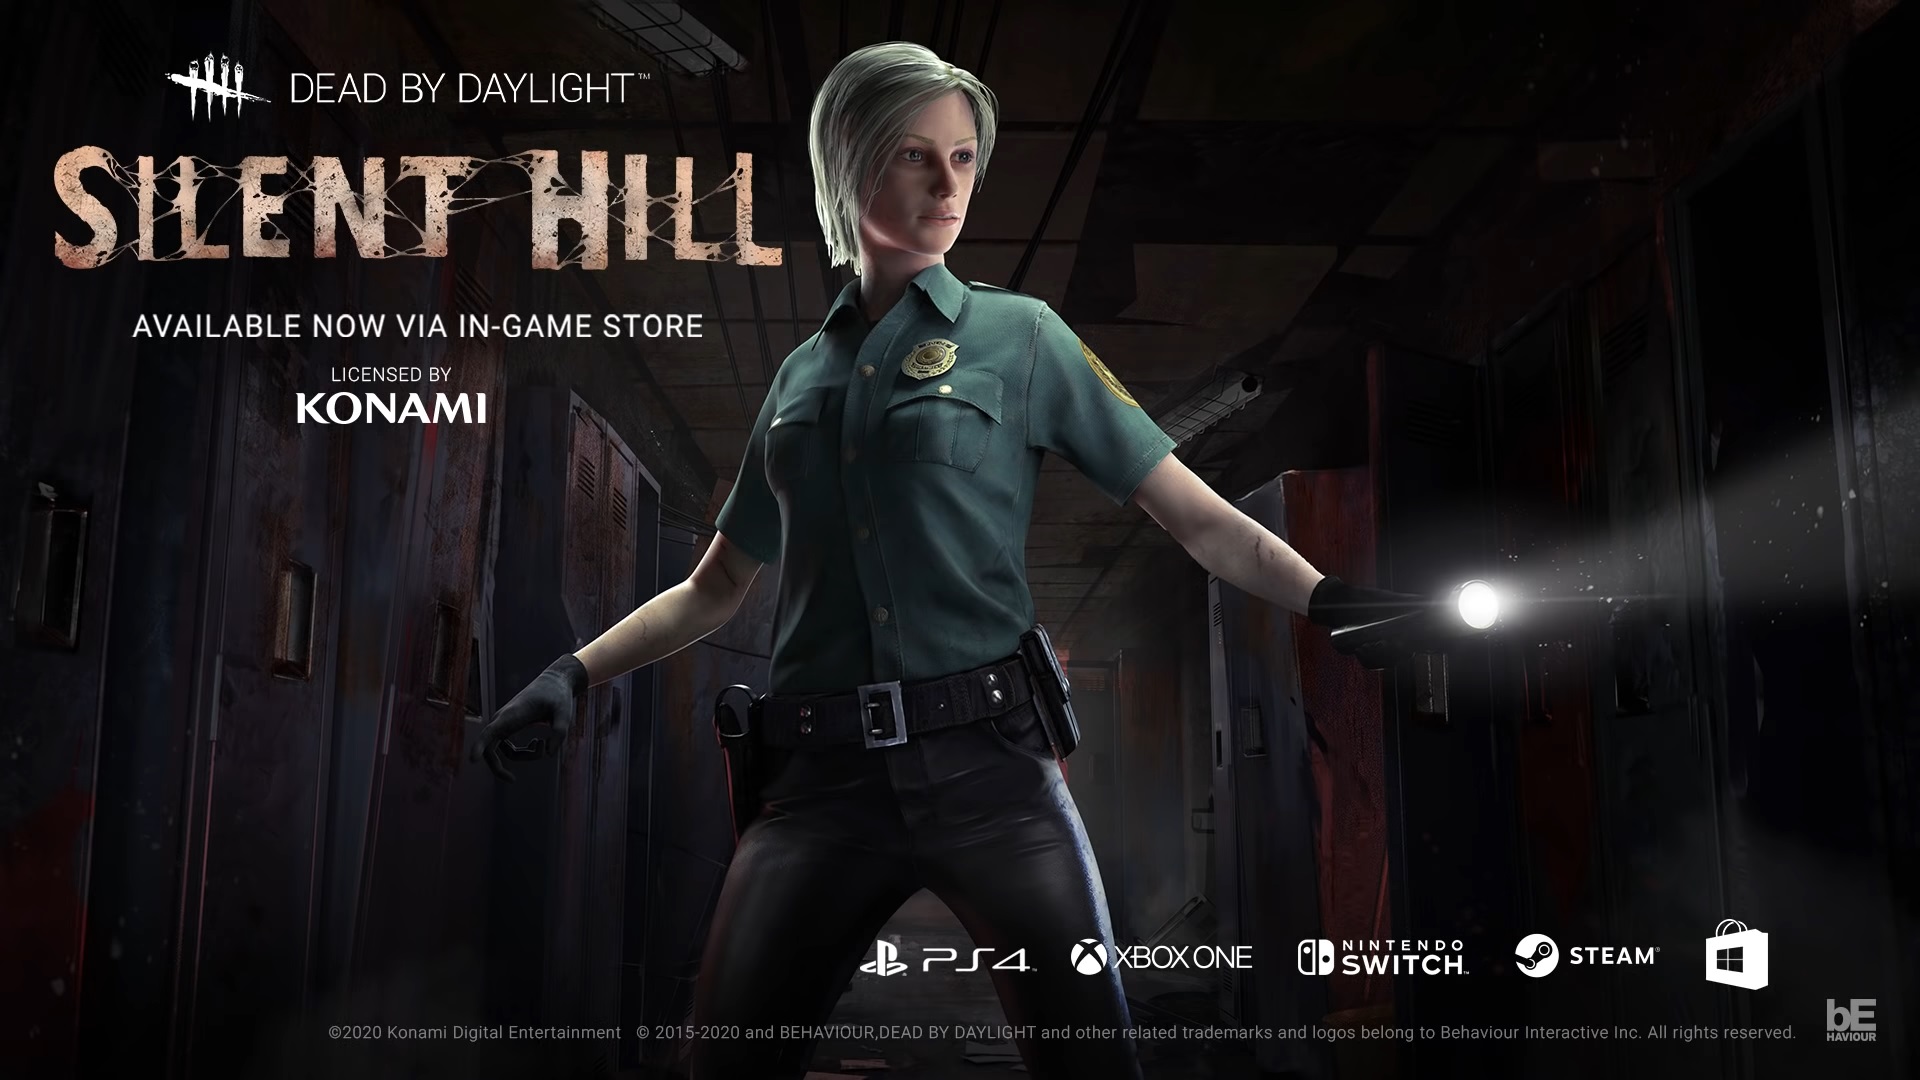 Dead by Daylight adds in another Silent Hill character, with poilice office...